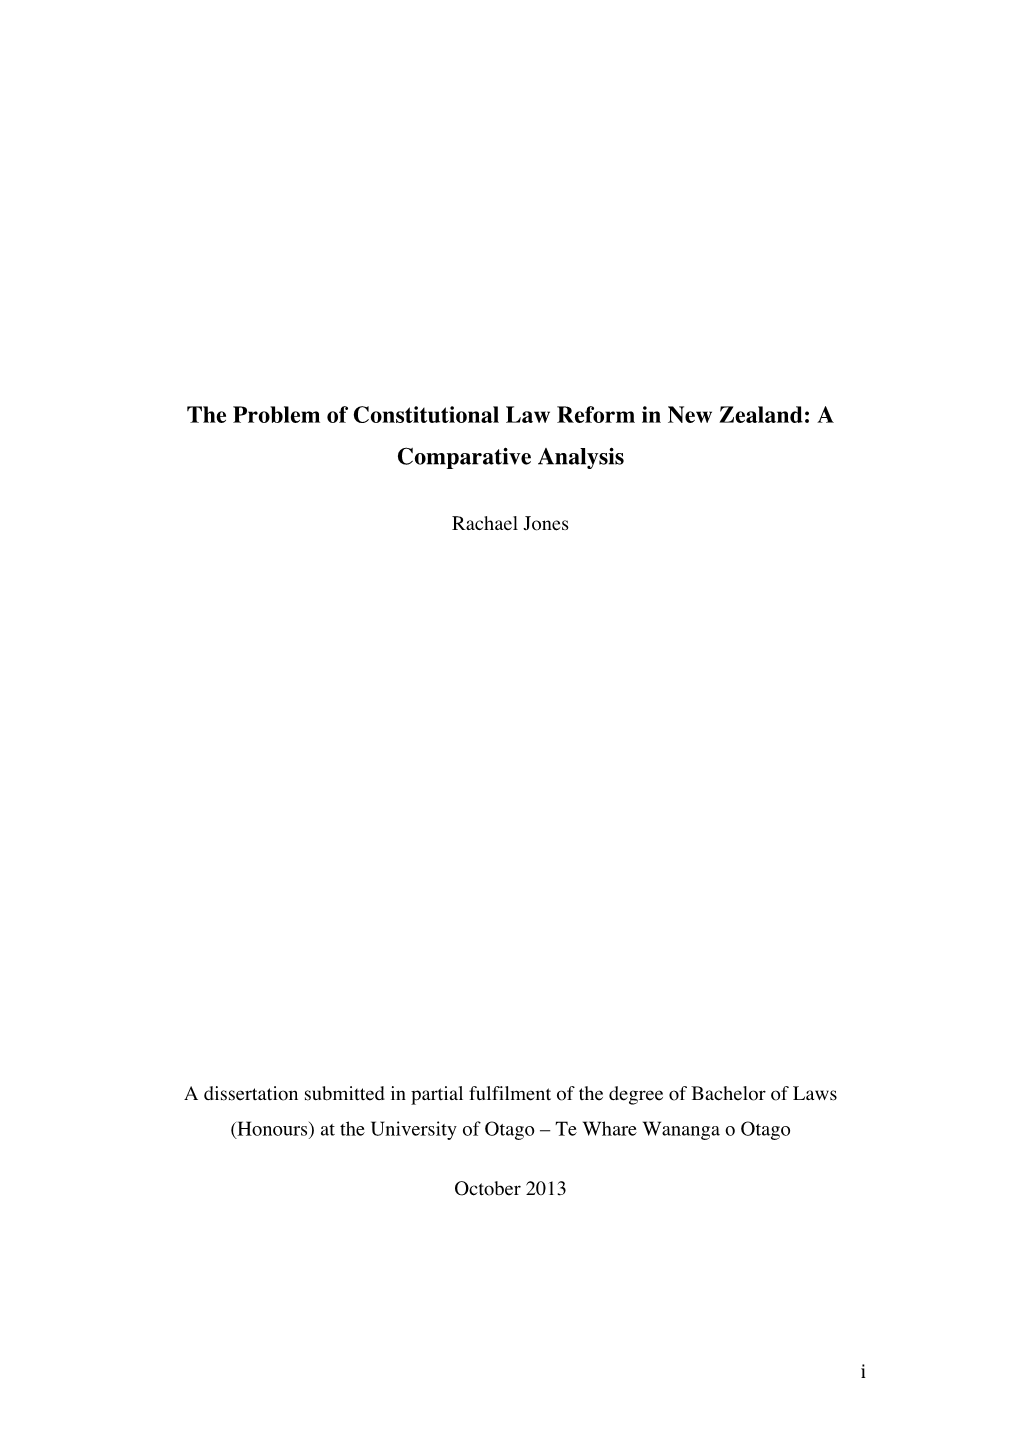 The Problem of Constitutional Law Reform in New Zealand: a Comparative Analysis